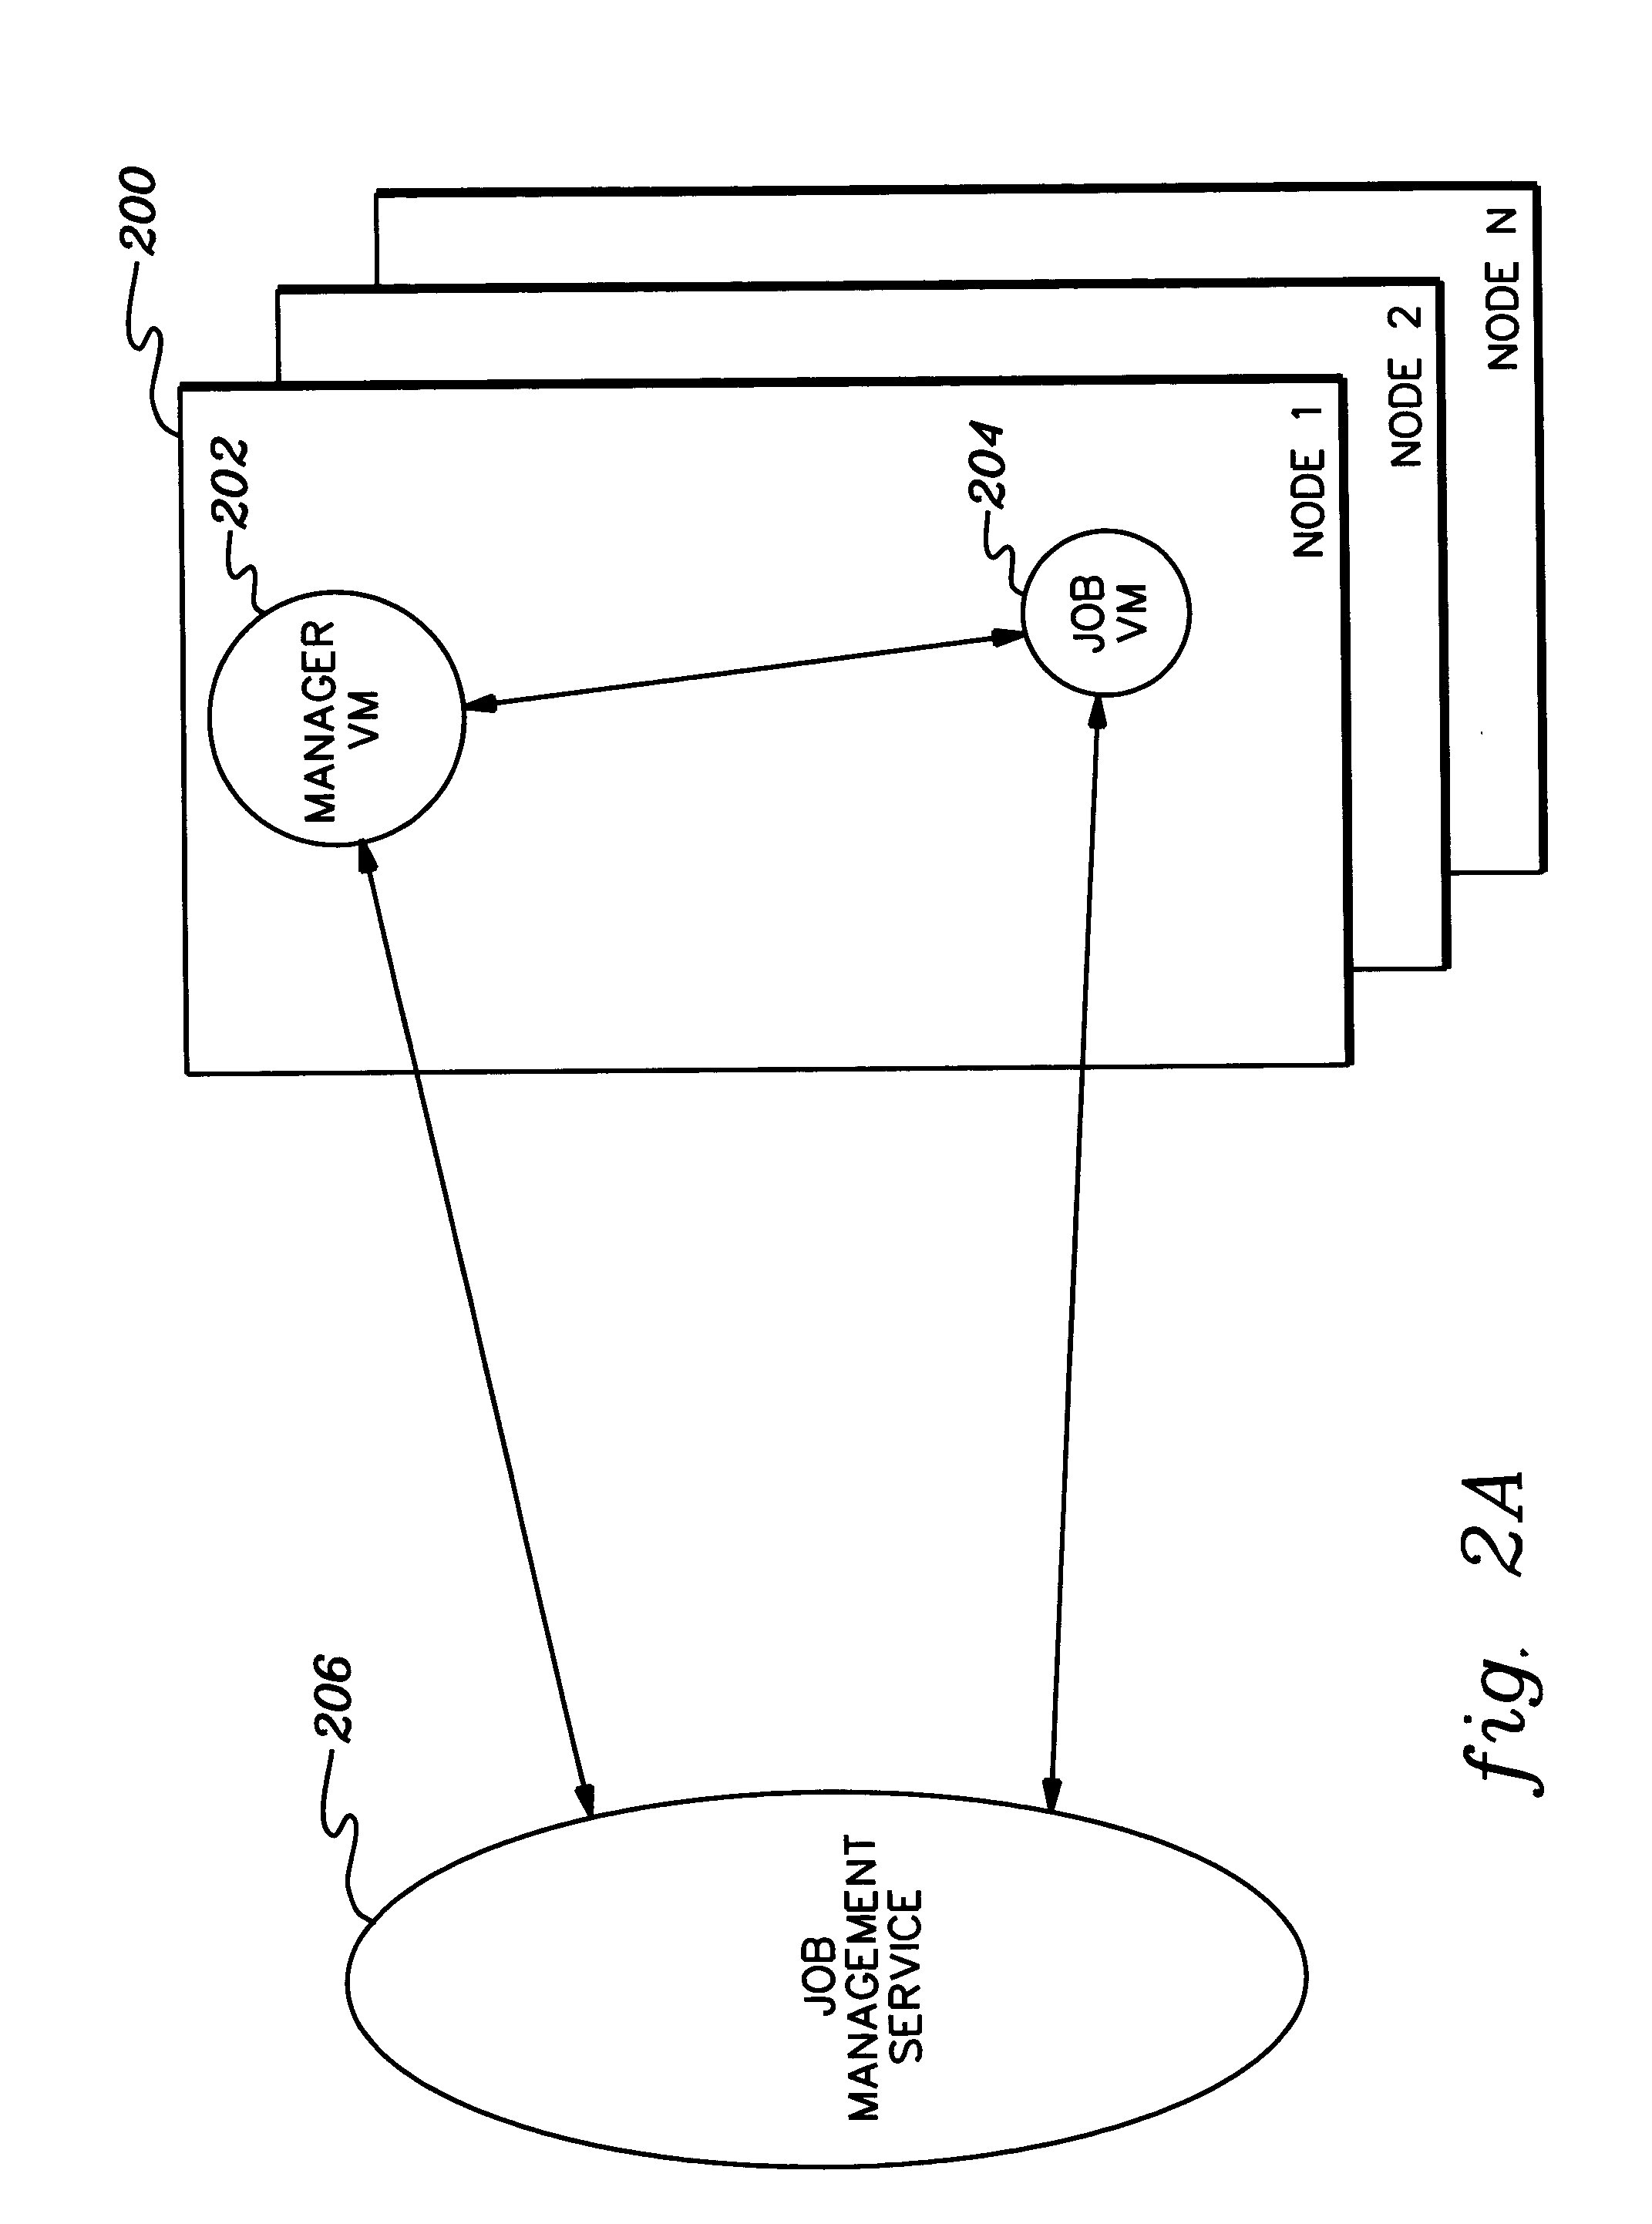 Managing processing within computing environments including initiation of virtual machines